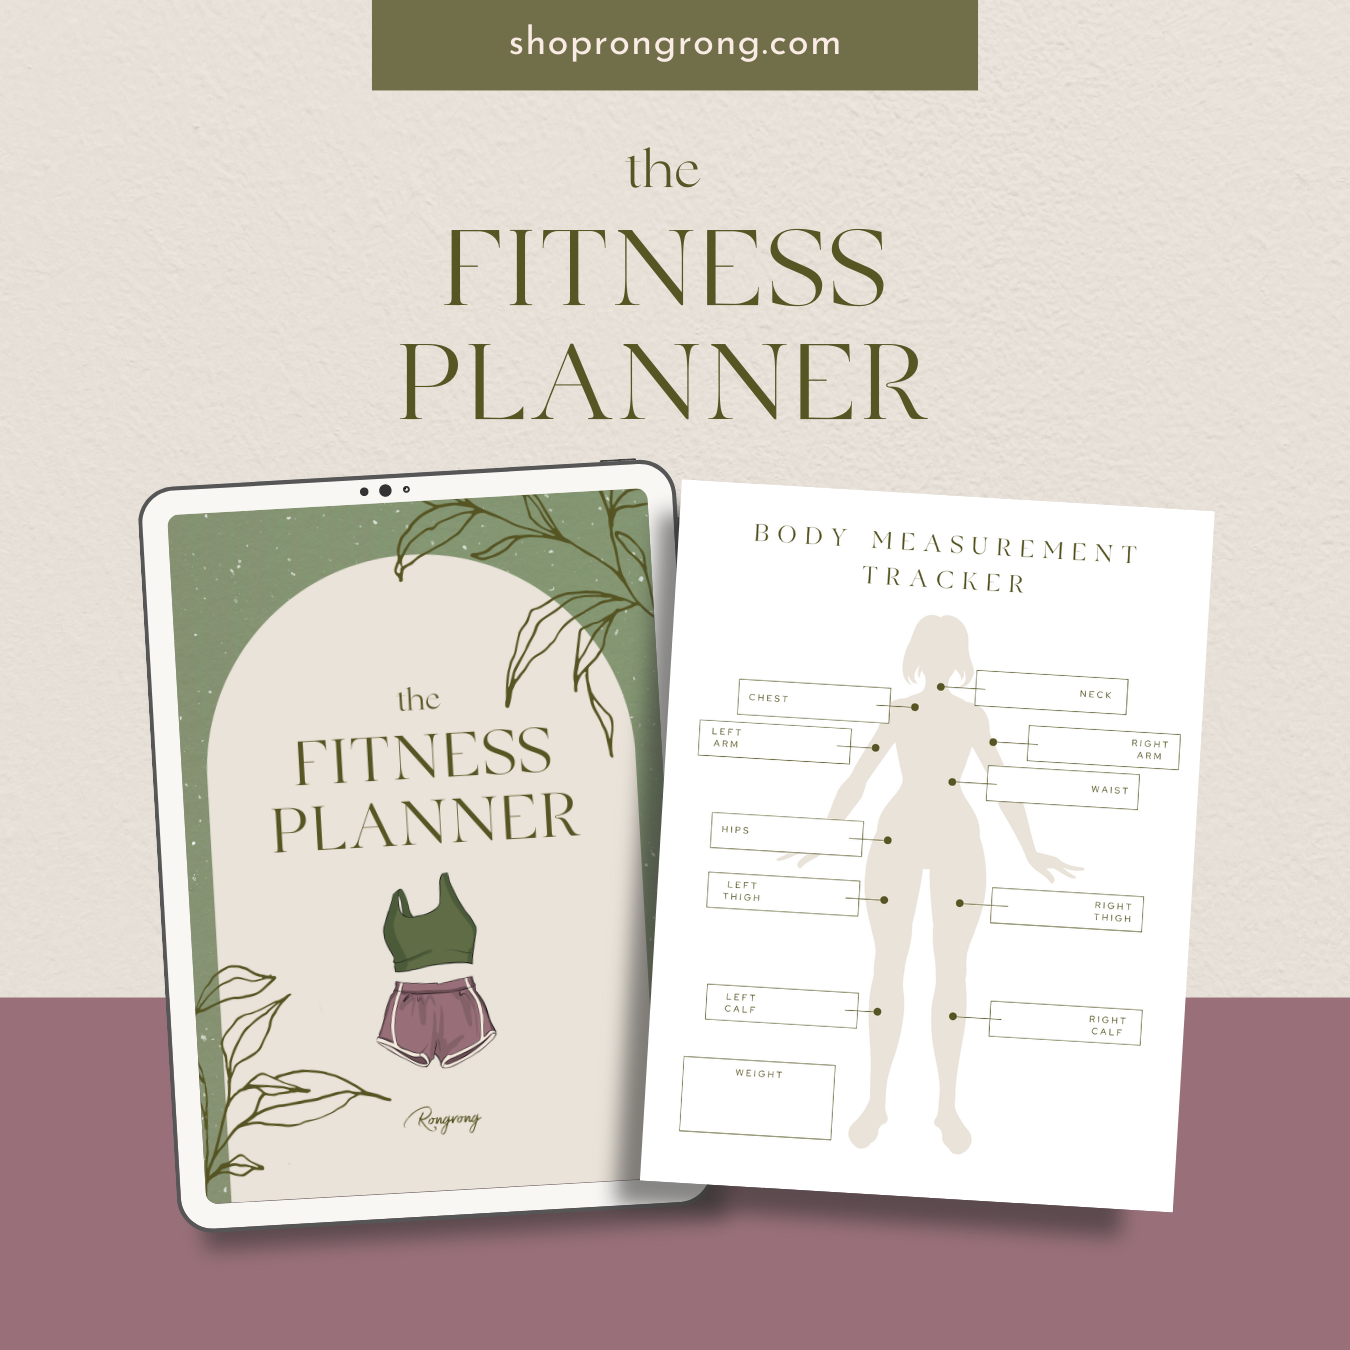 Shop Rongrong the Fitness Digital Planner 